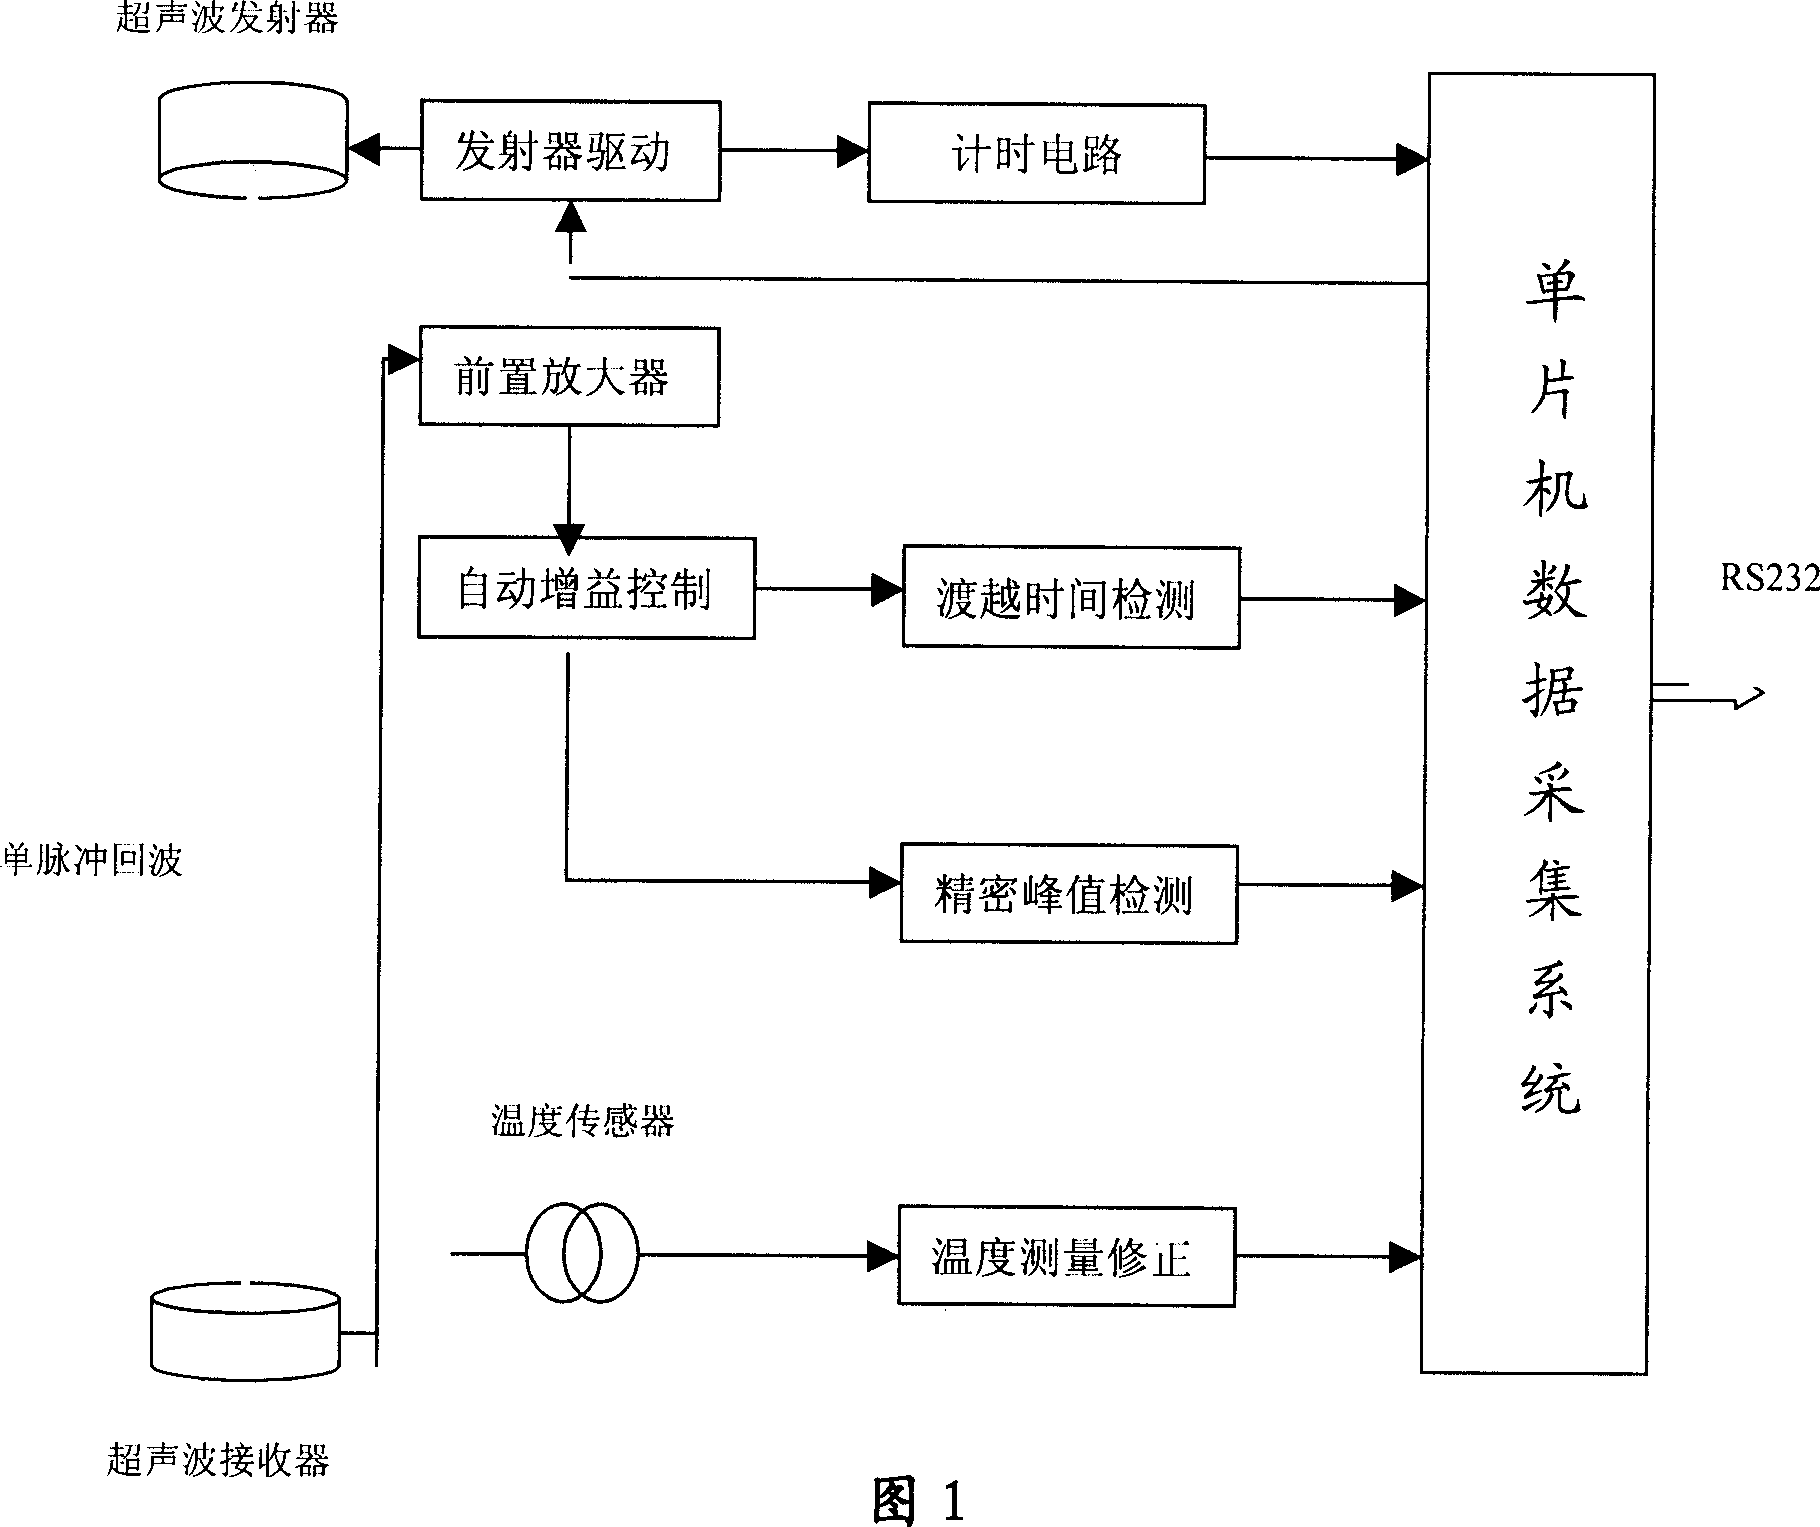 Method and device for measuring displacement/distance based on supersonic wave or sonic continuous sound-field phase-demodulating principle